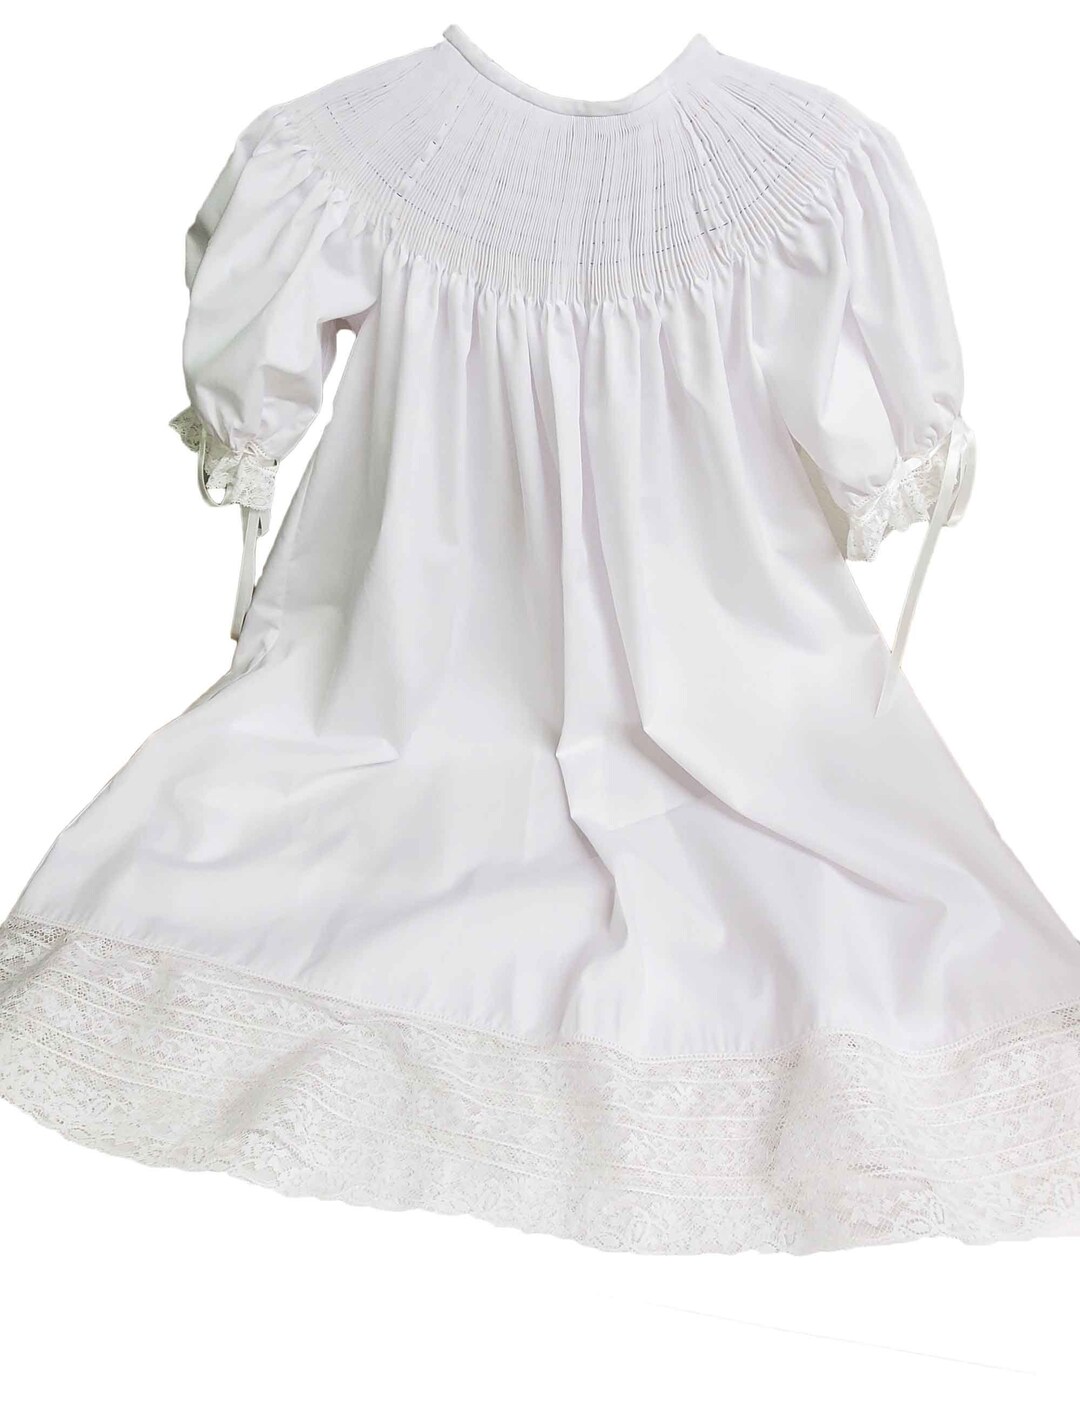 Ready-to-ship Ready to Smock Size 5 White Broadcloth Bishop - Etsy